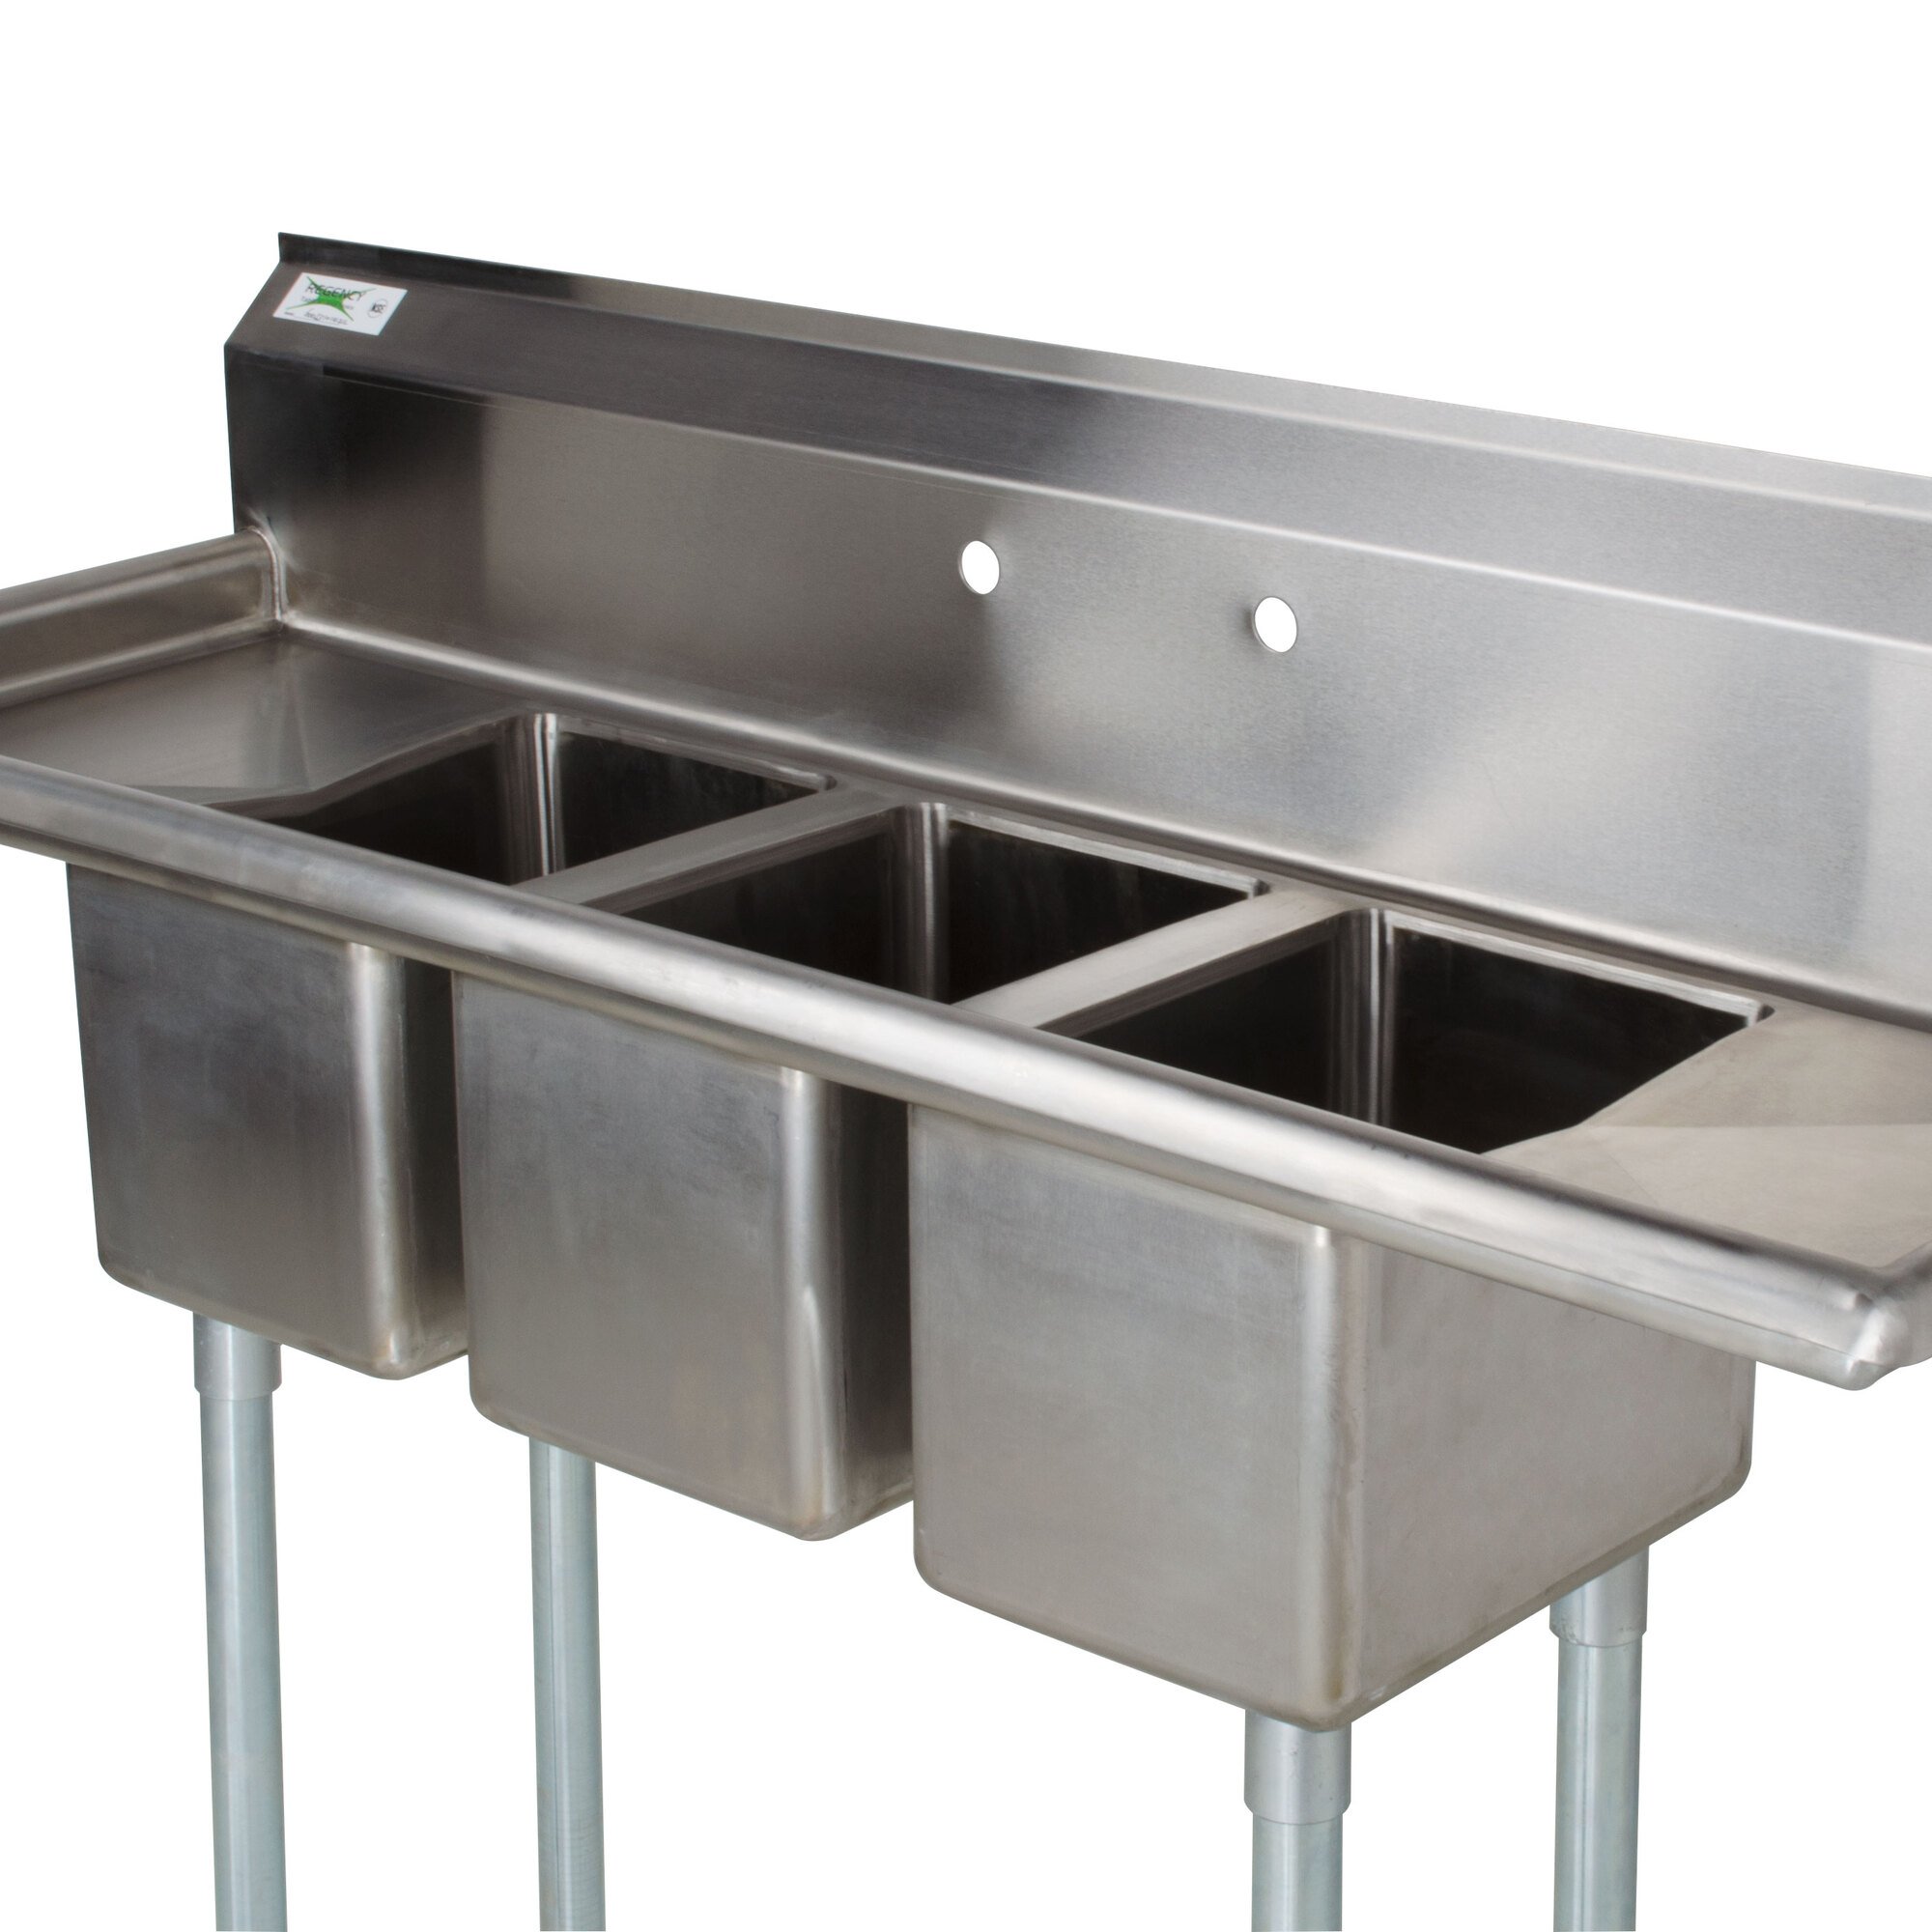 3 Compartment Sink With 2 Drainboards Regency 16 Gauge Three